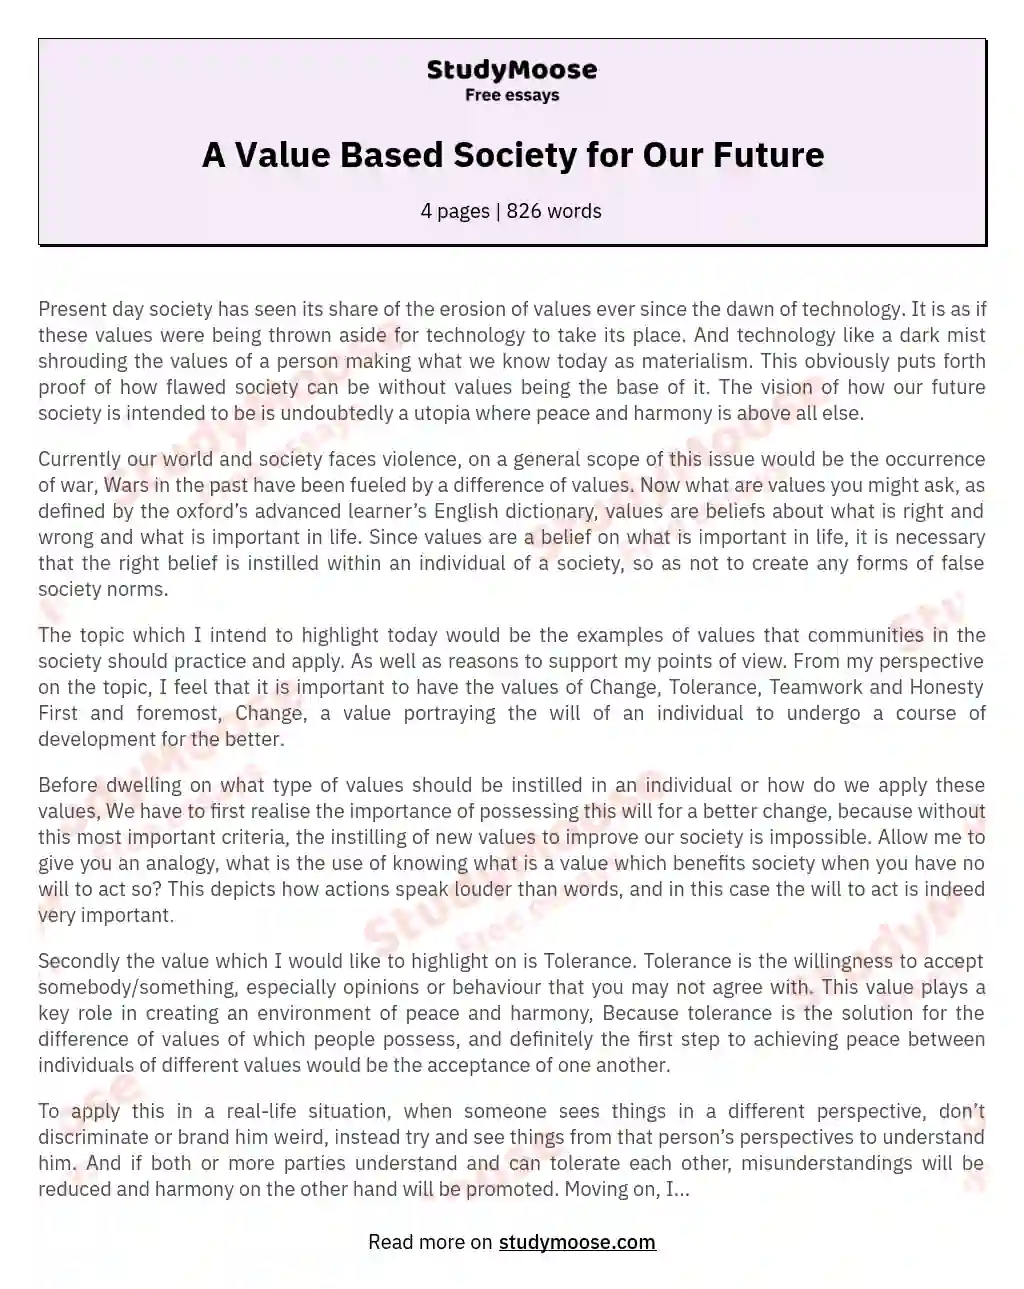 A Value Based Society for Our Future essay